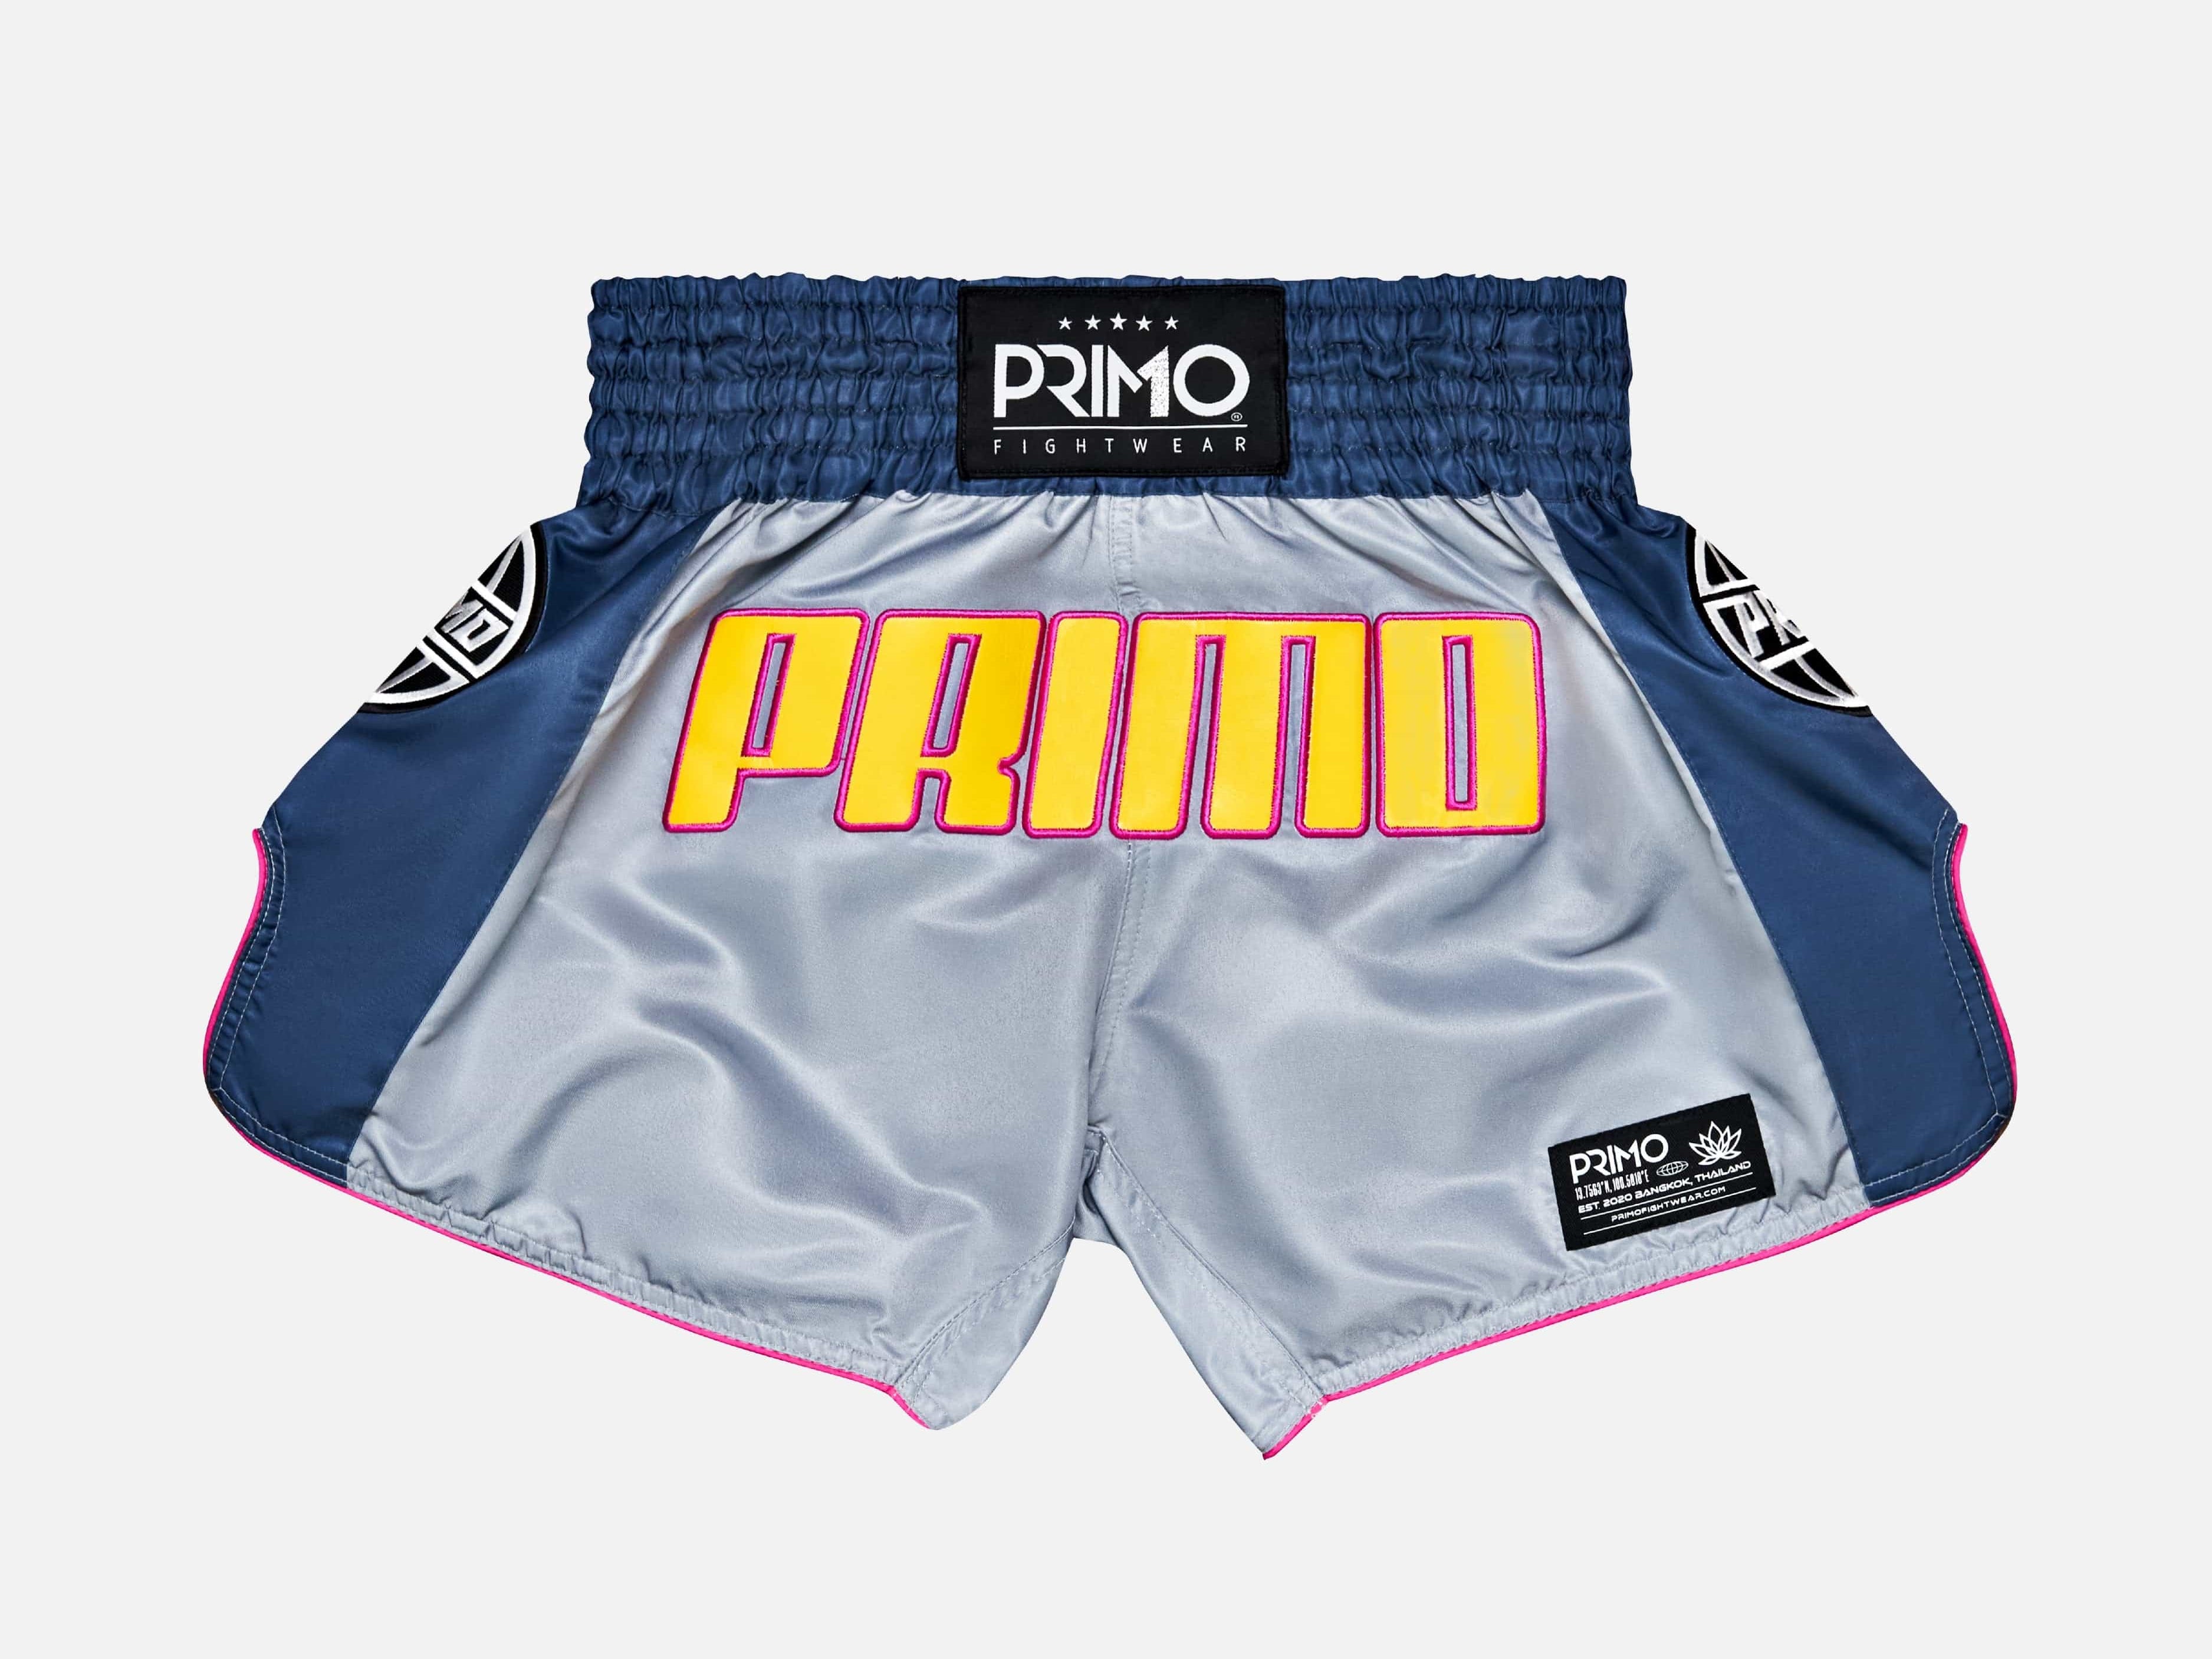 Primo Fight Wear Official Muay Thai Shorts - Trinity Series - Grey